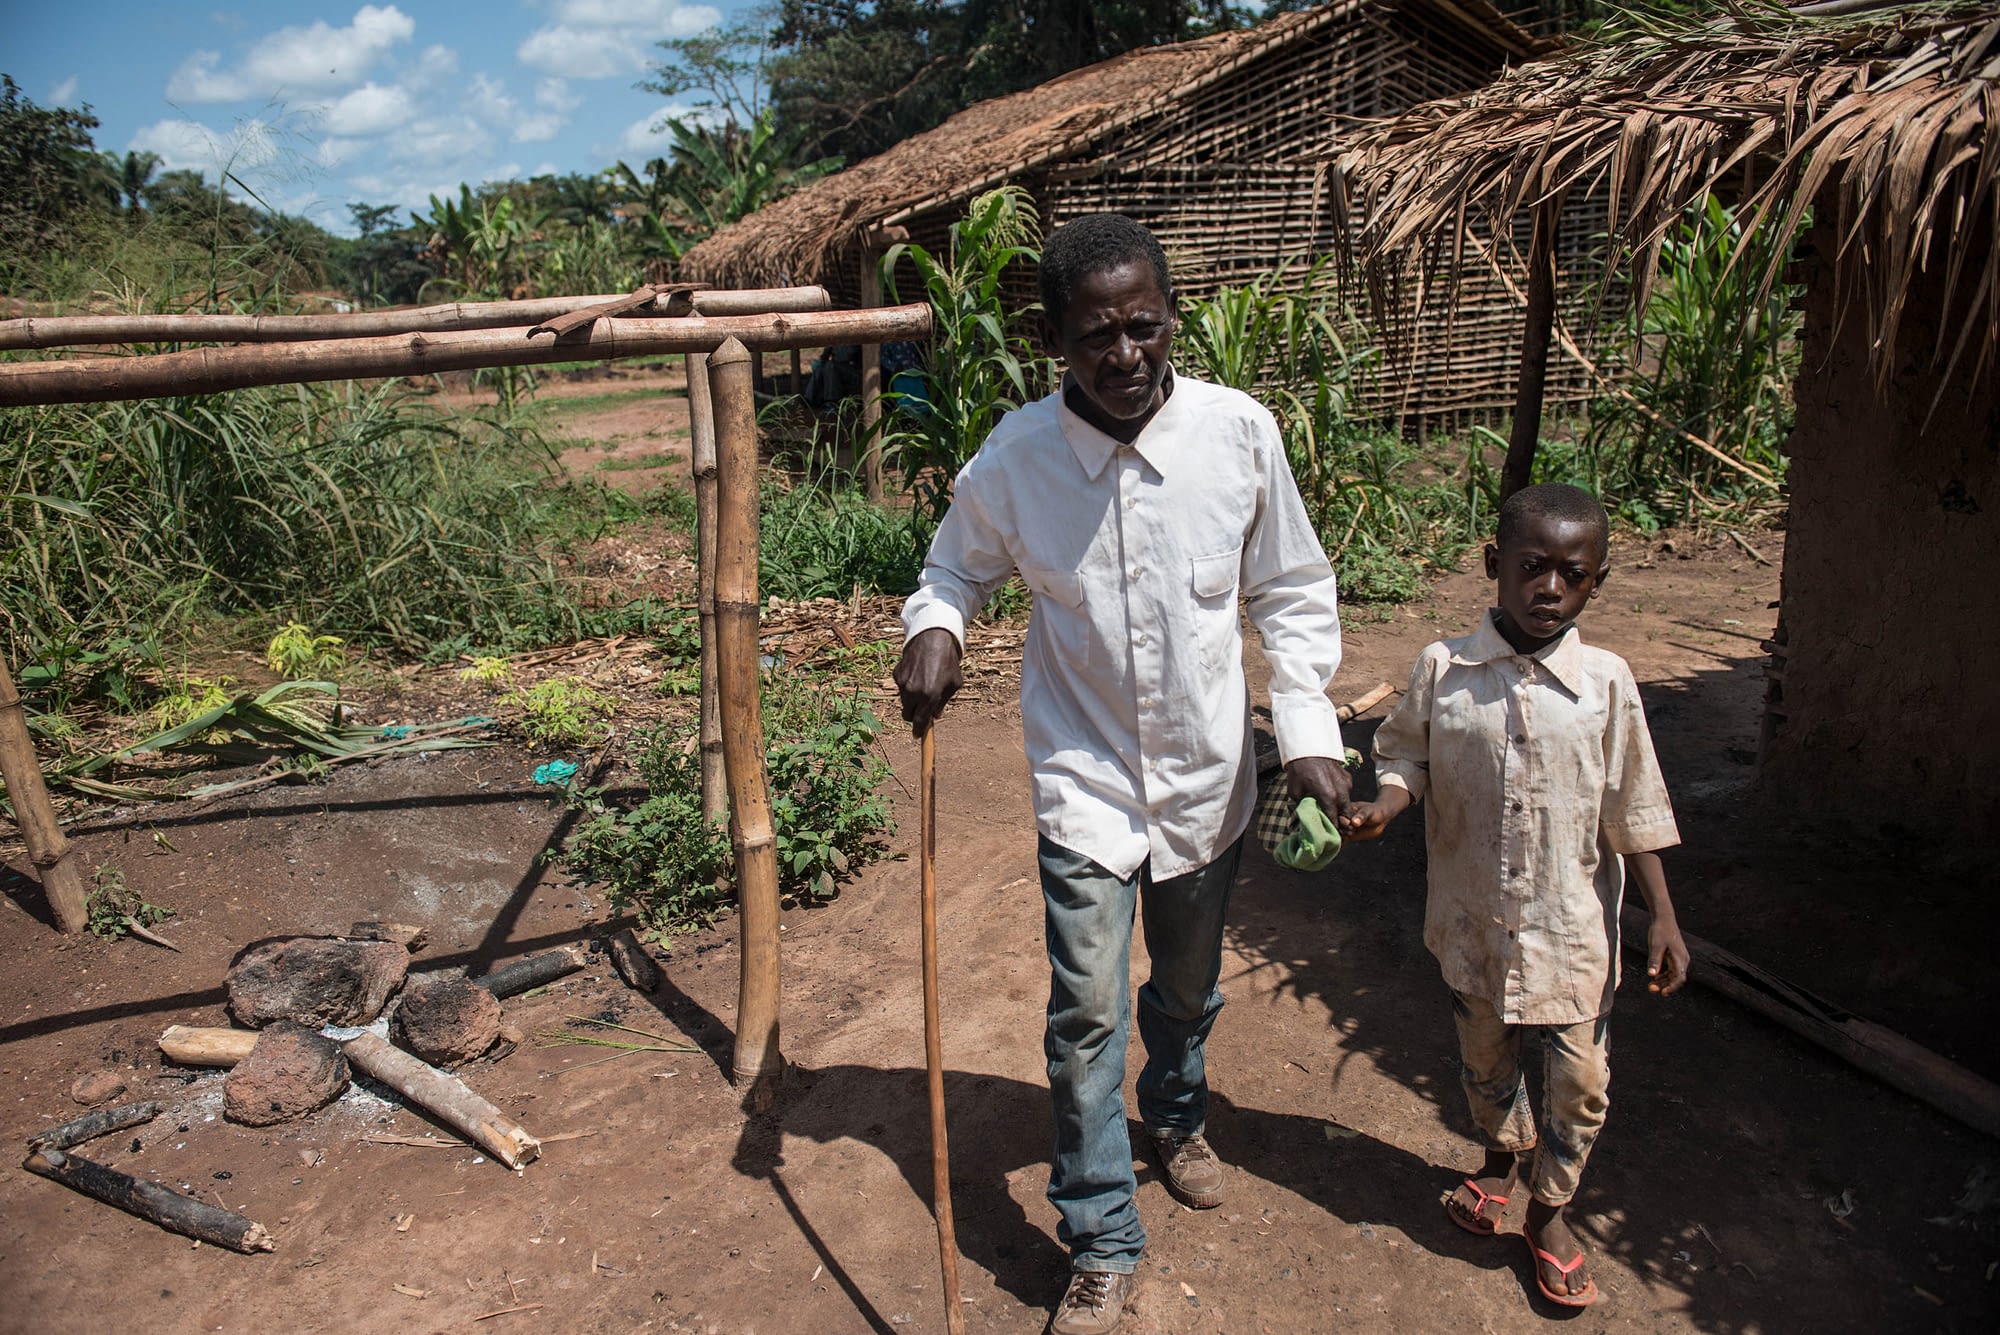 Father walking with a cane and holding his son's hand